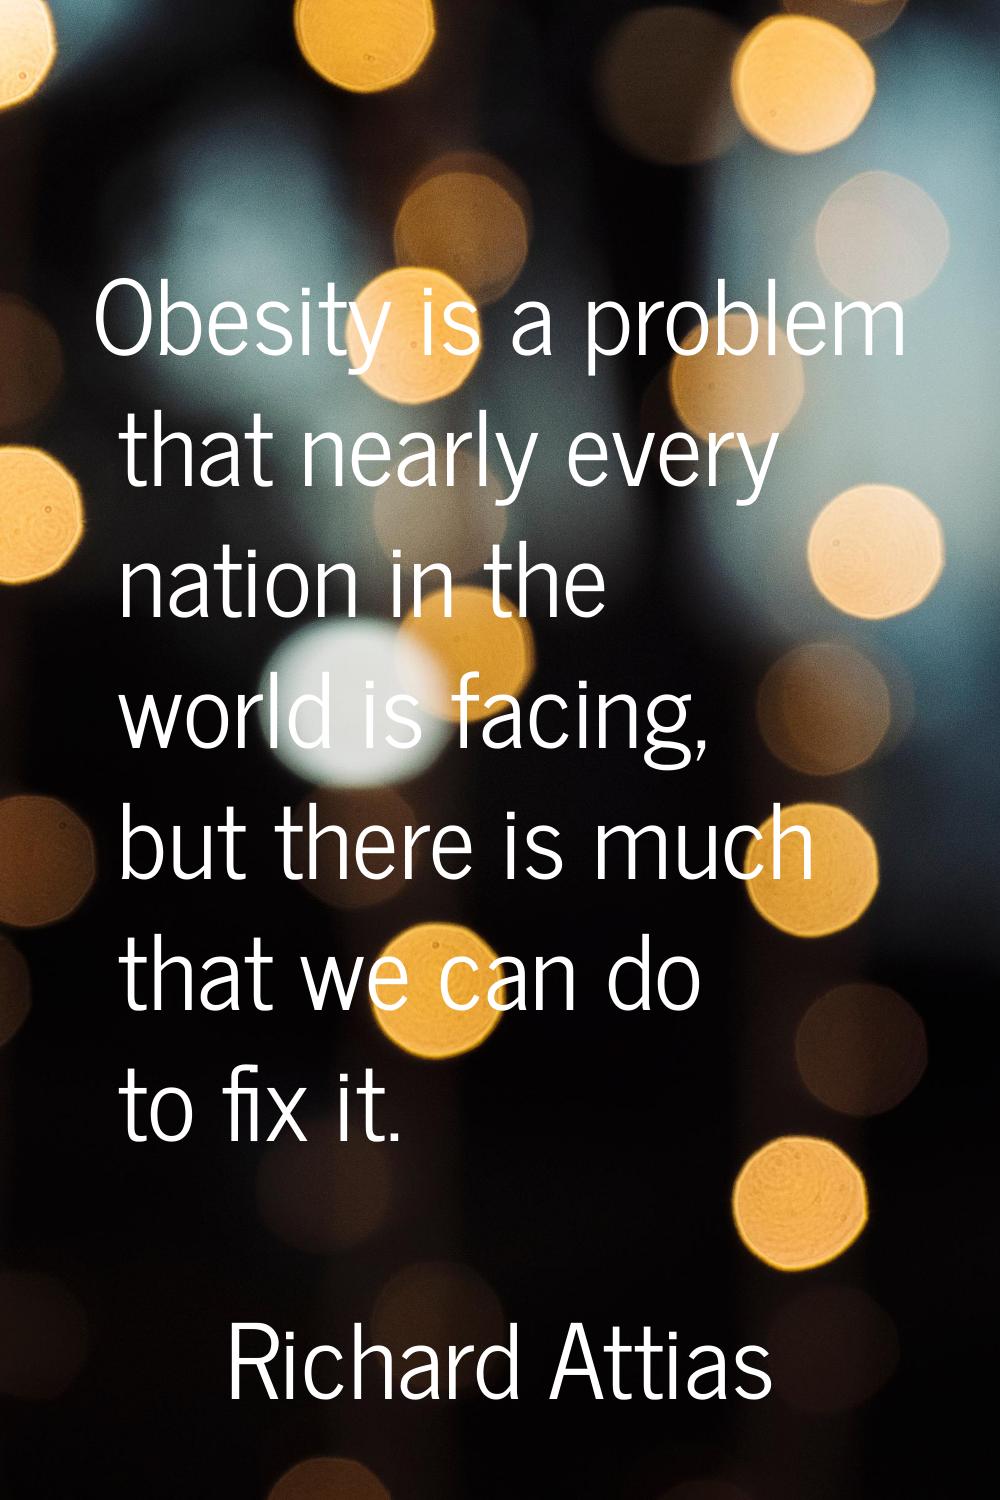 Obesity is a problem that nearly every nation in the world is facing, but there is much that we can